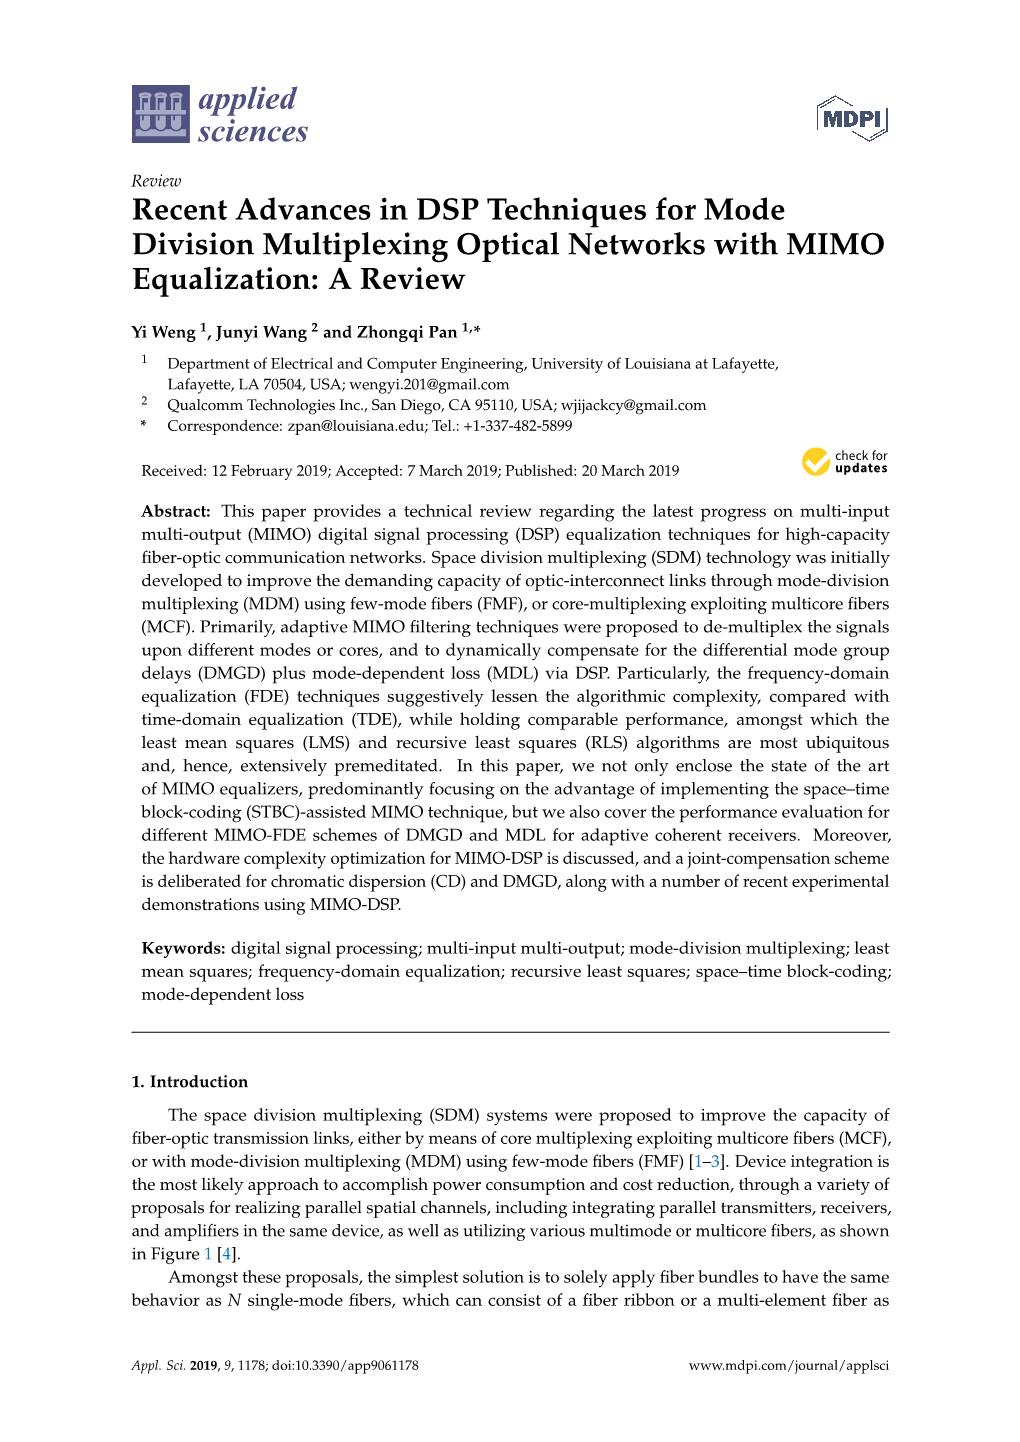 Recent Advances in DSP Techniques for Mode Division Multiplexing Optical Networks with MIMO Equalization: a Review